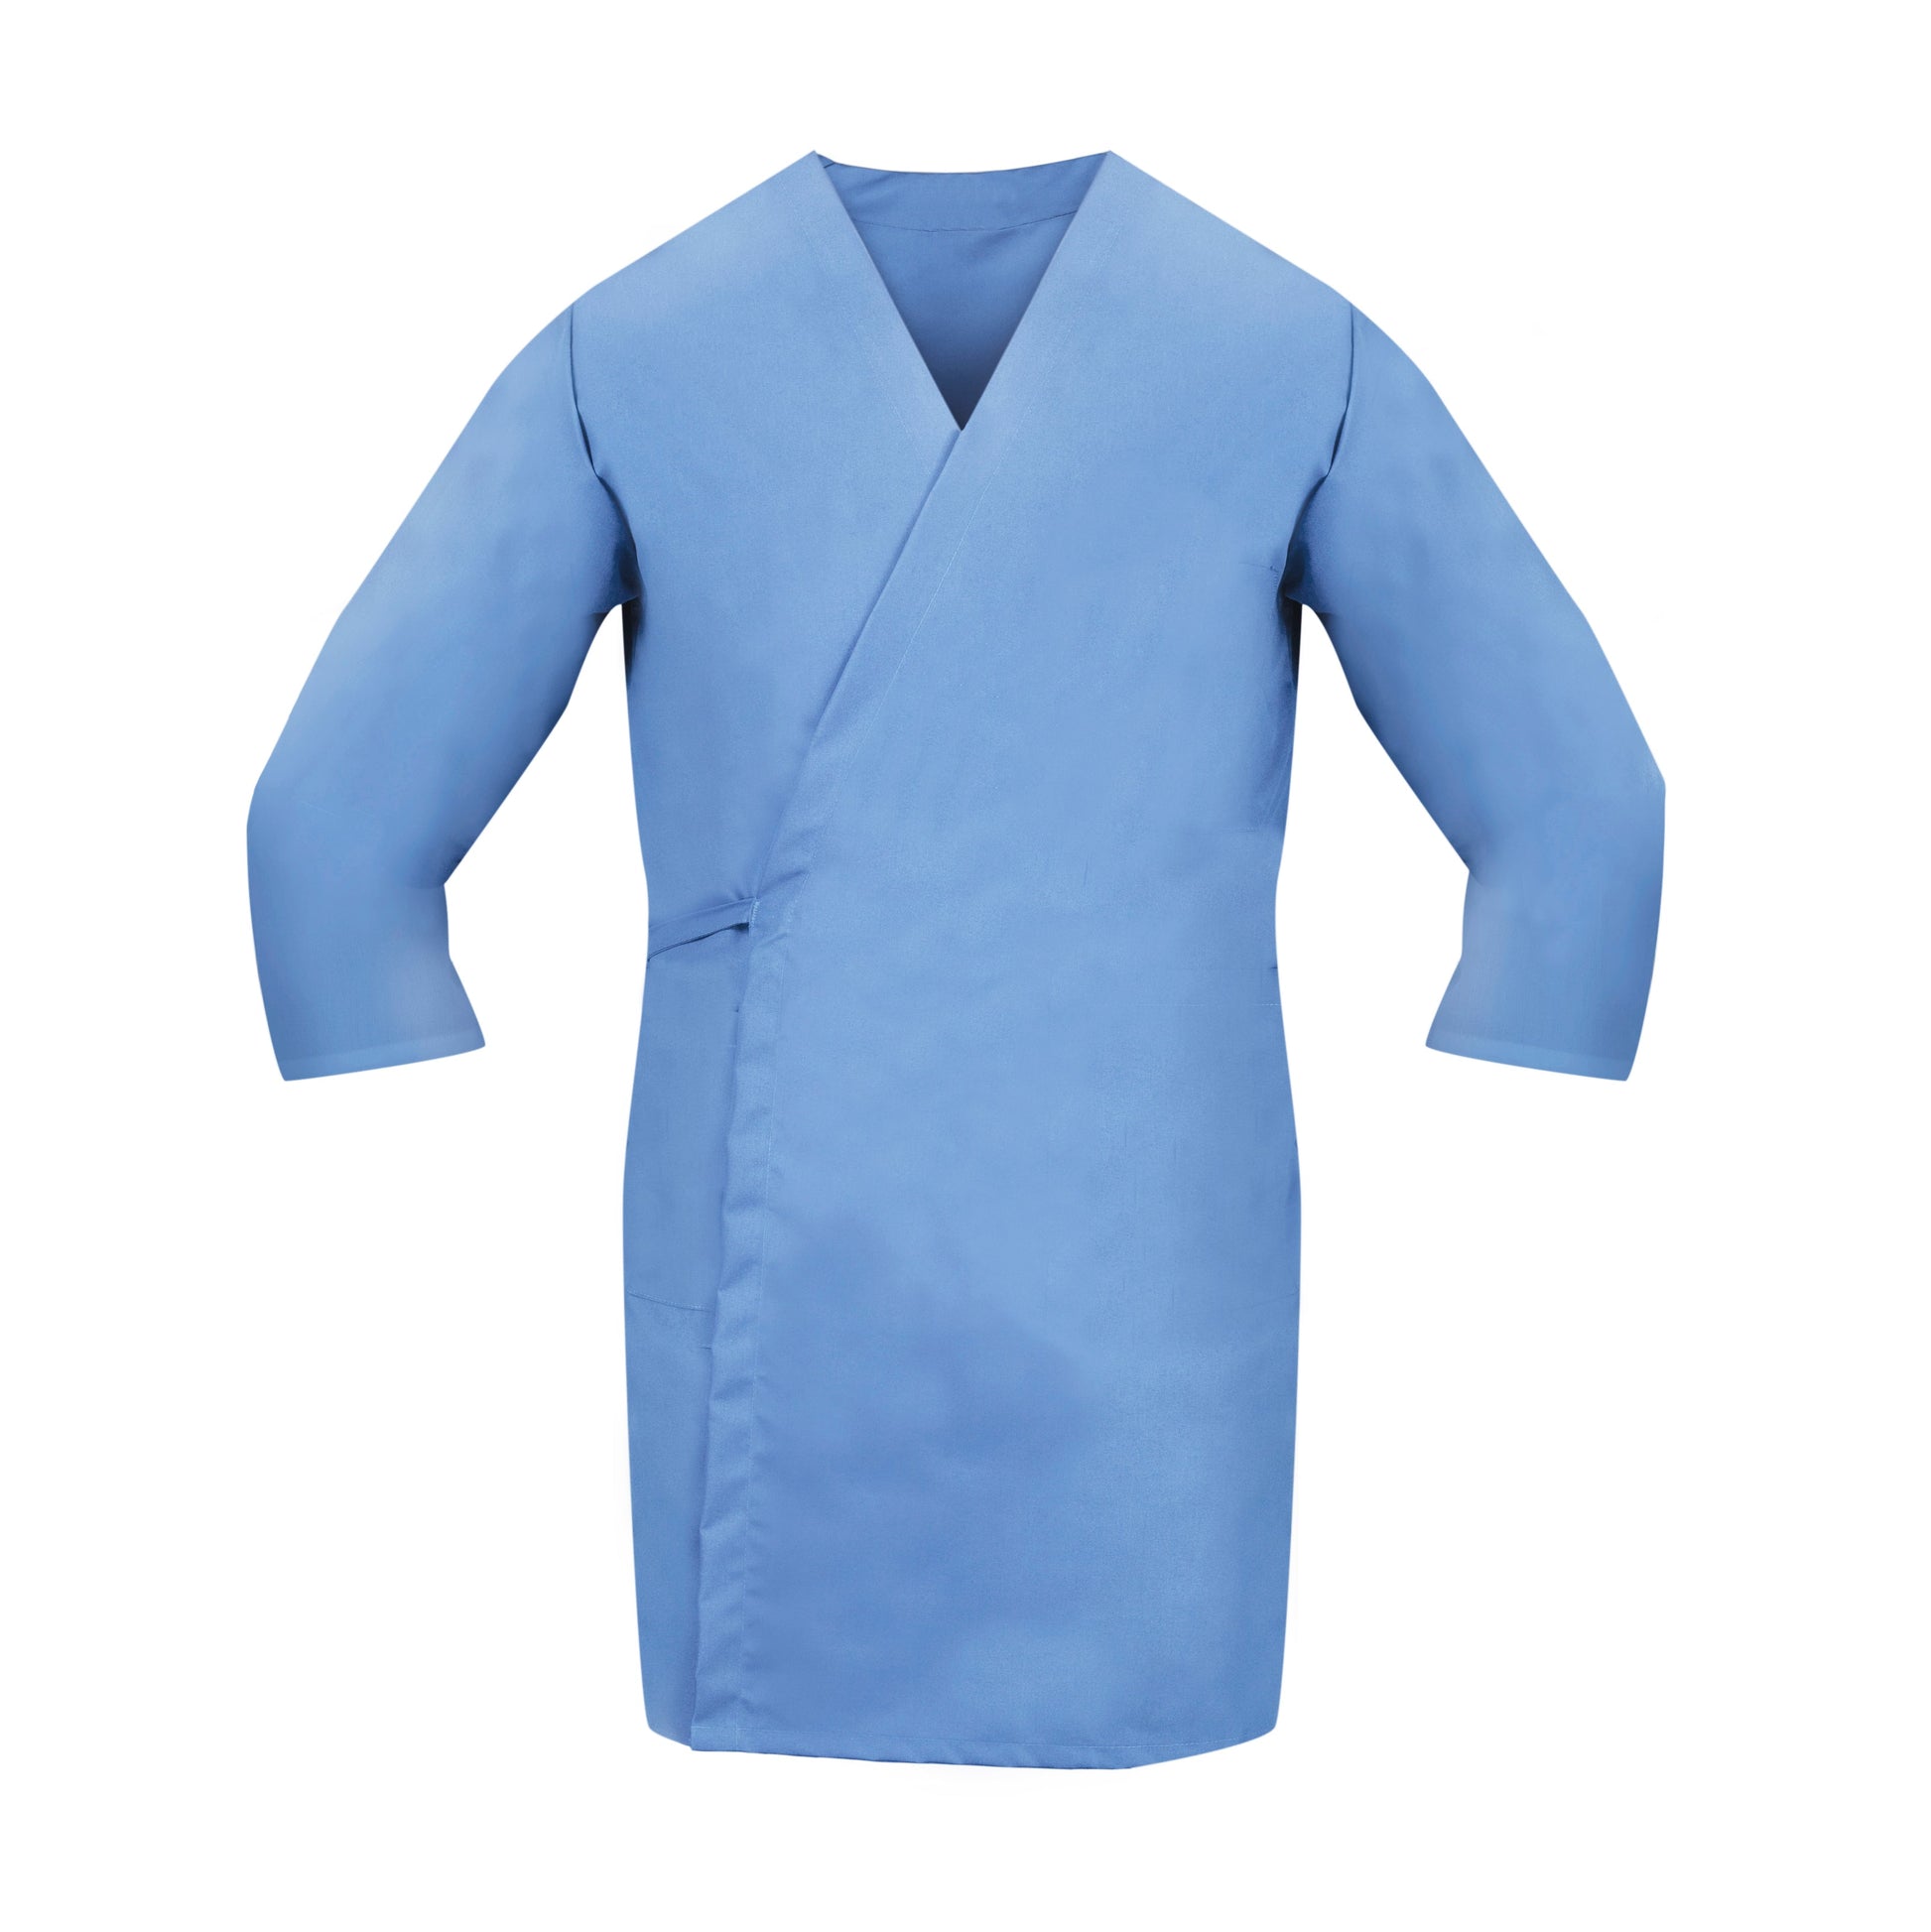 American Dawn | Medium Light Blue Smock Wraps With 3/4 Sleeves And No Pockets